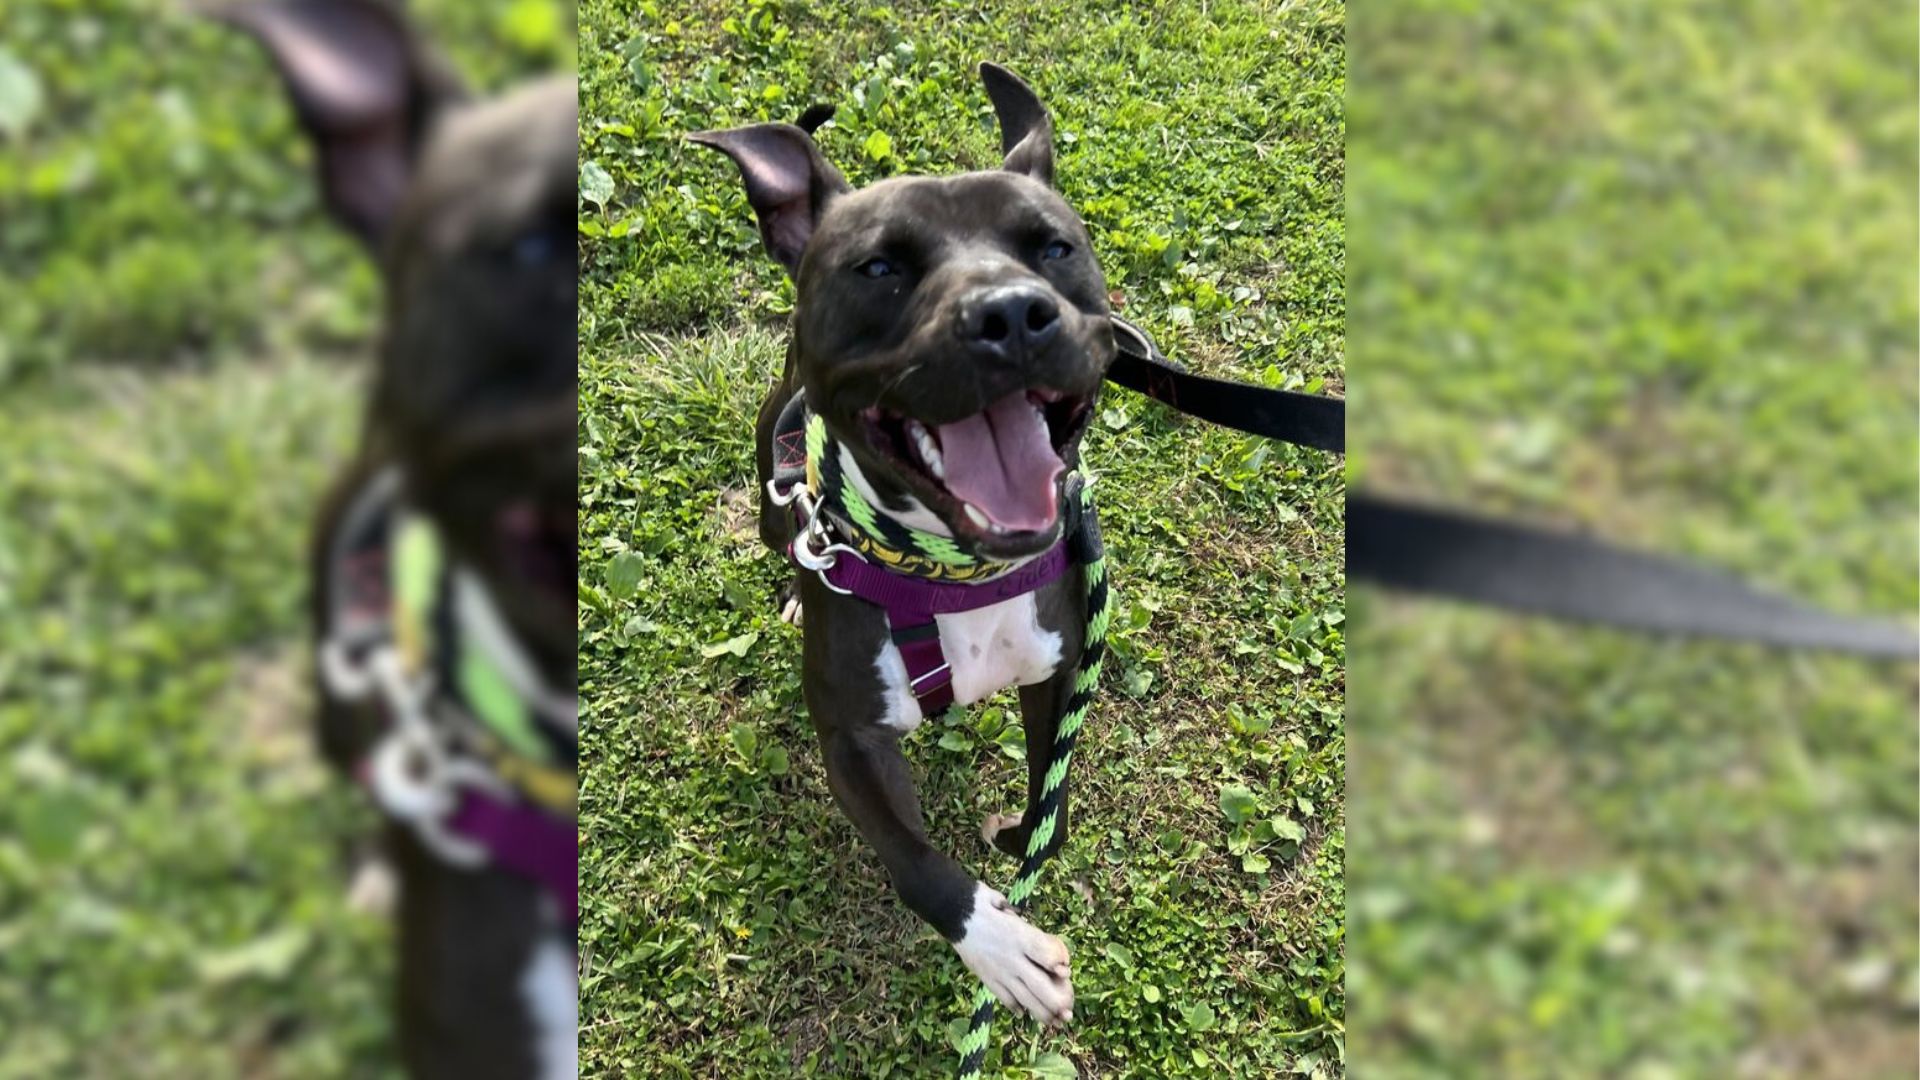 Forgotten Dog Who Spent Over 2 Years In A Shelter Can’t Control Joy On “Special Outing”